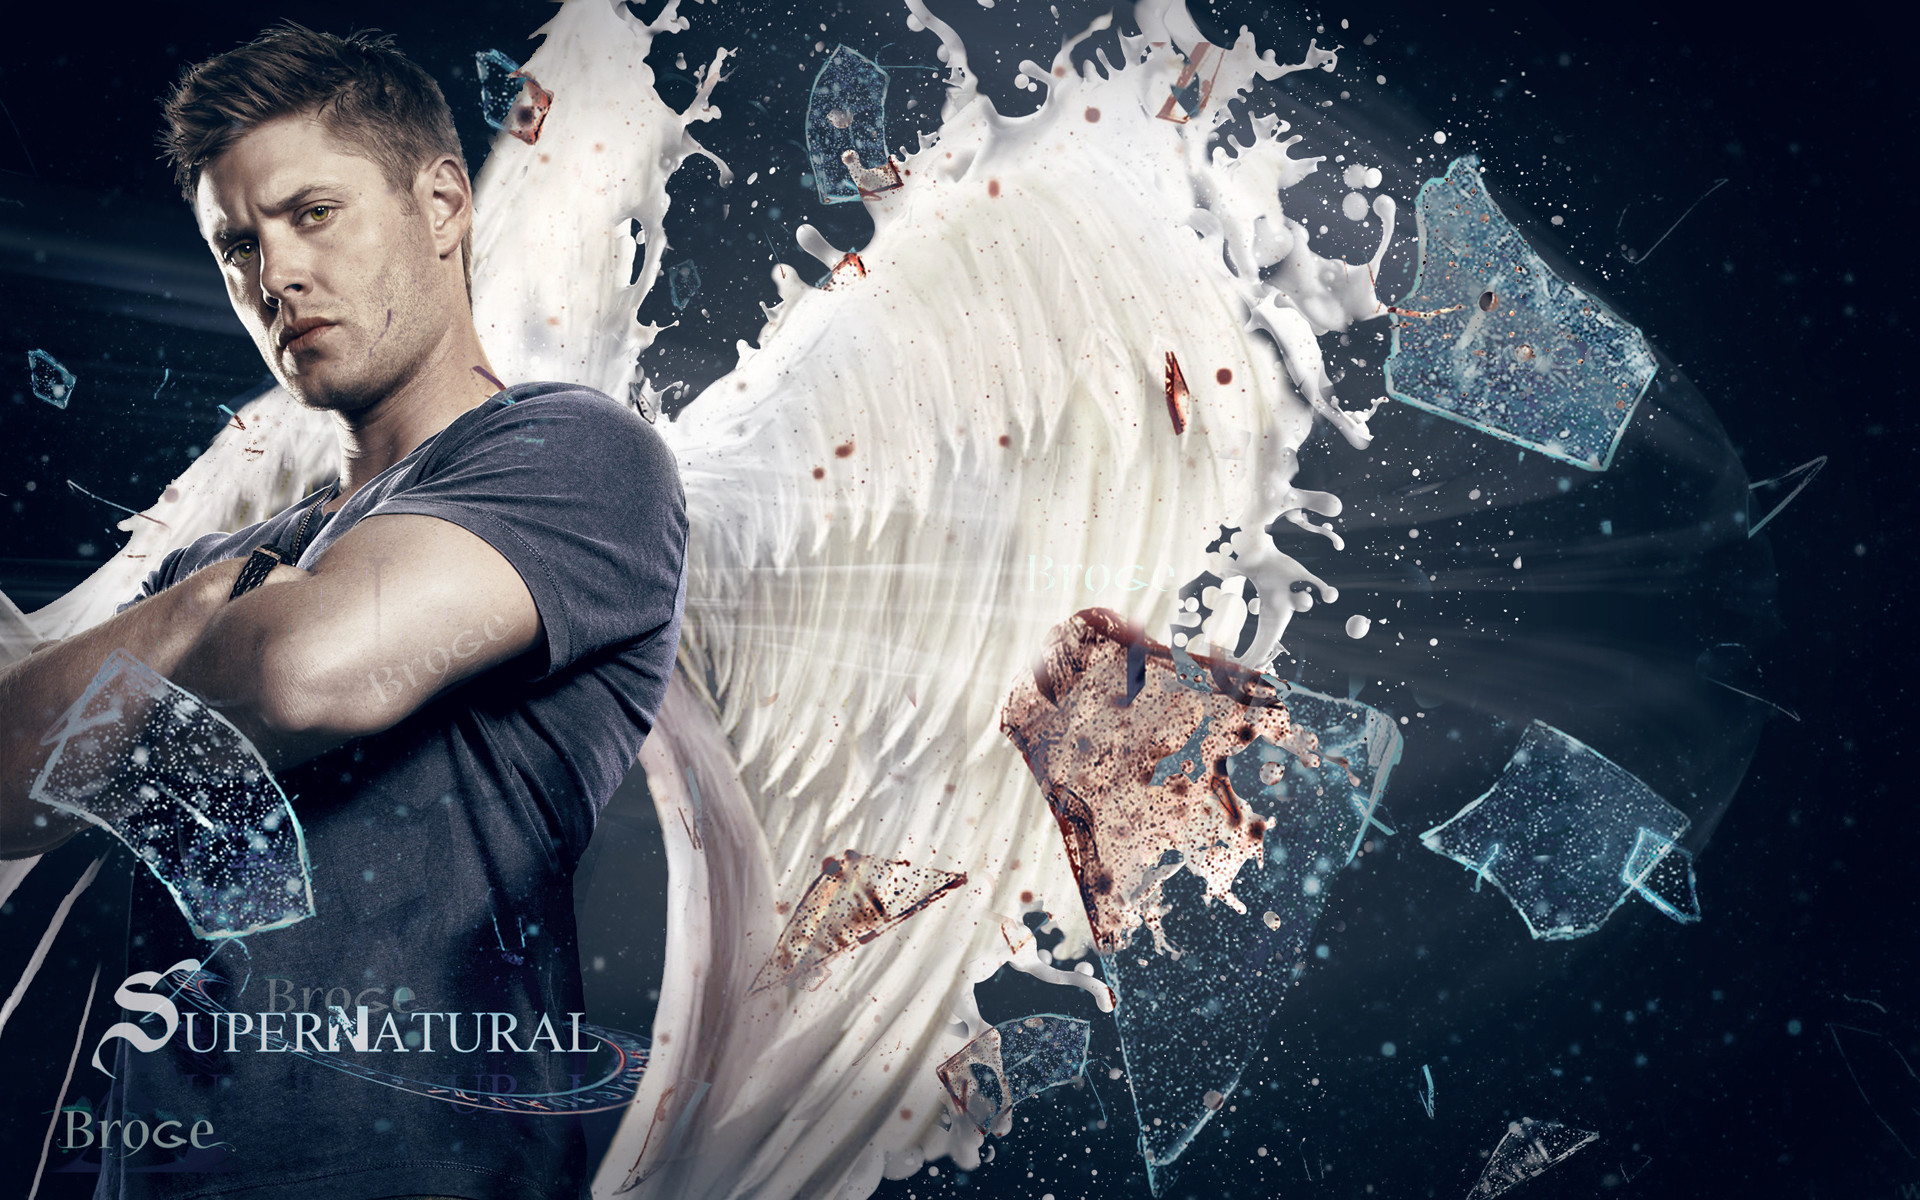 1920x1200 Ieva0311 images Supernatural HD wallpaper and background photos